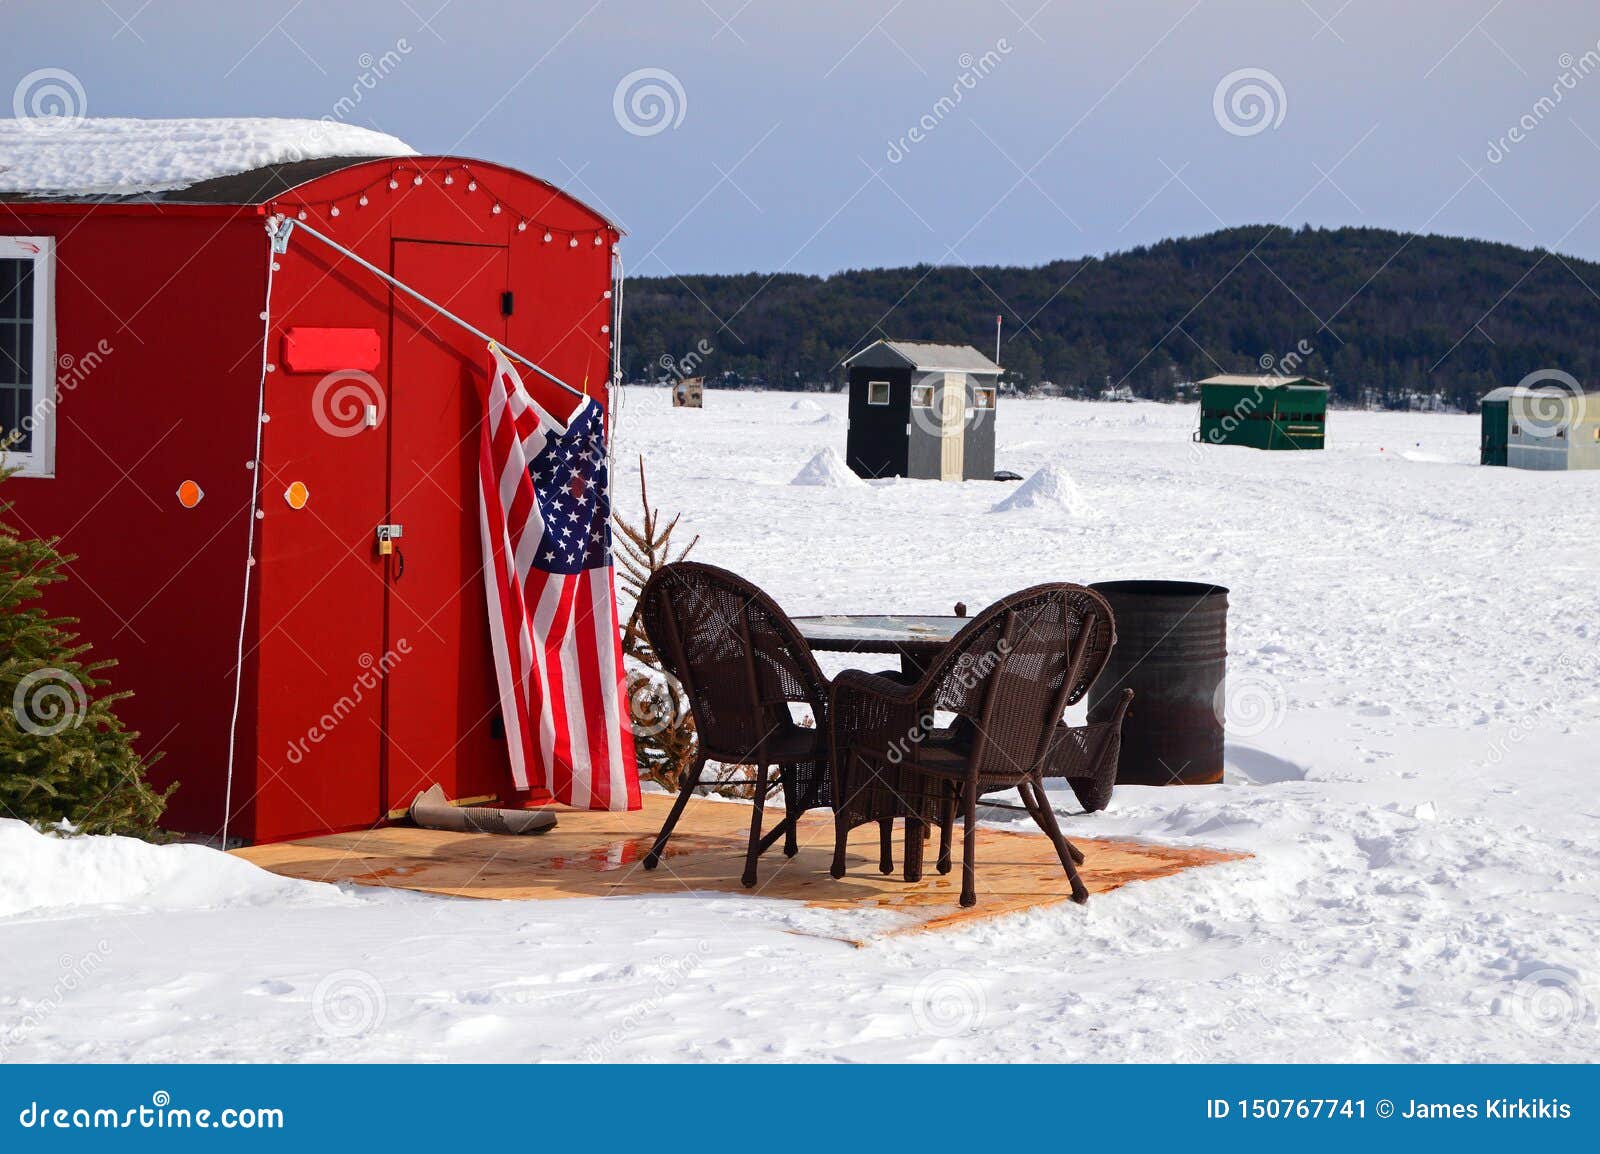 Patio Furniture Outside An Ice Fishing Shack On A Frozen Lake